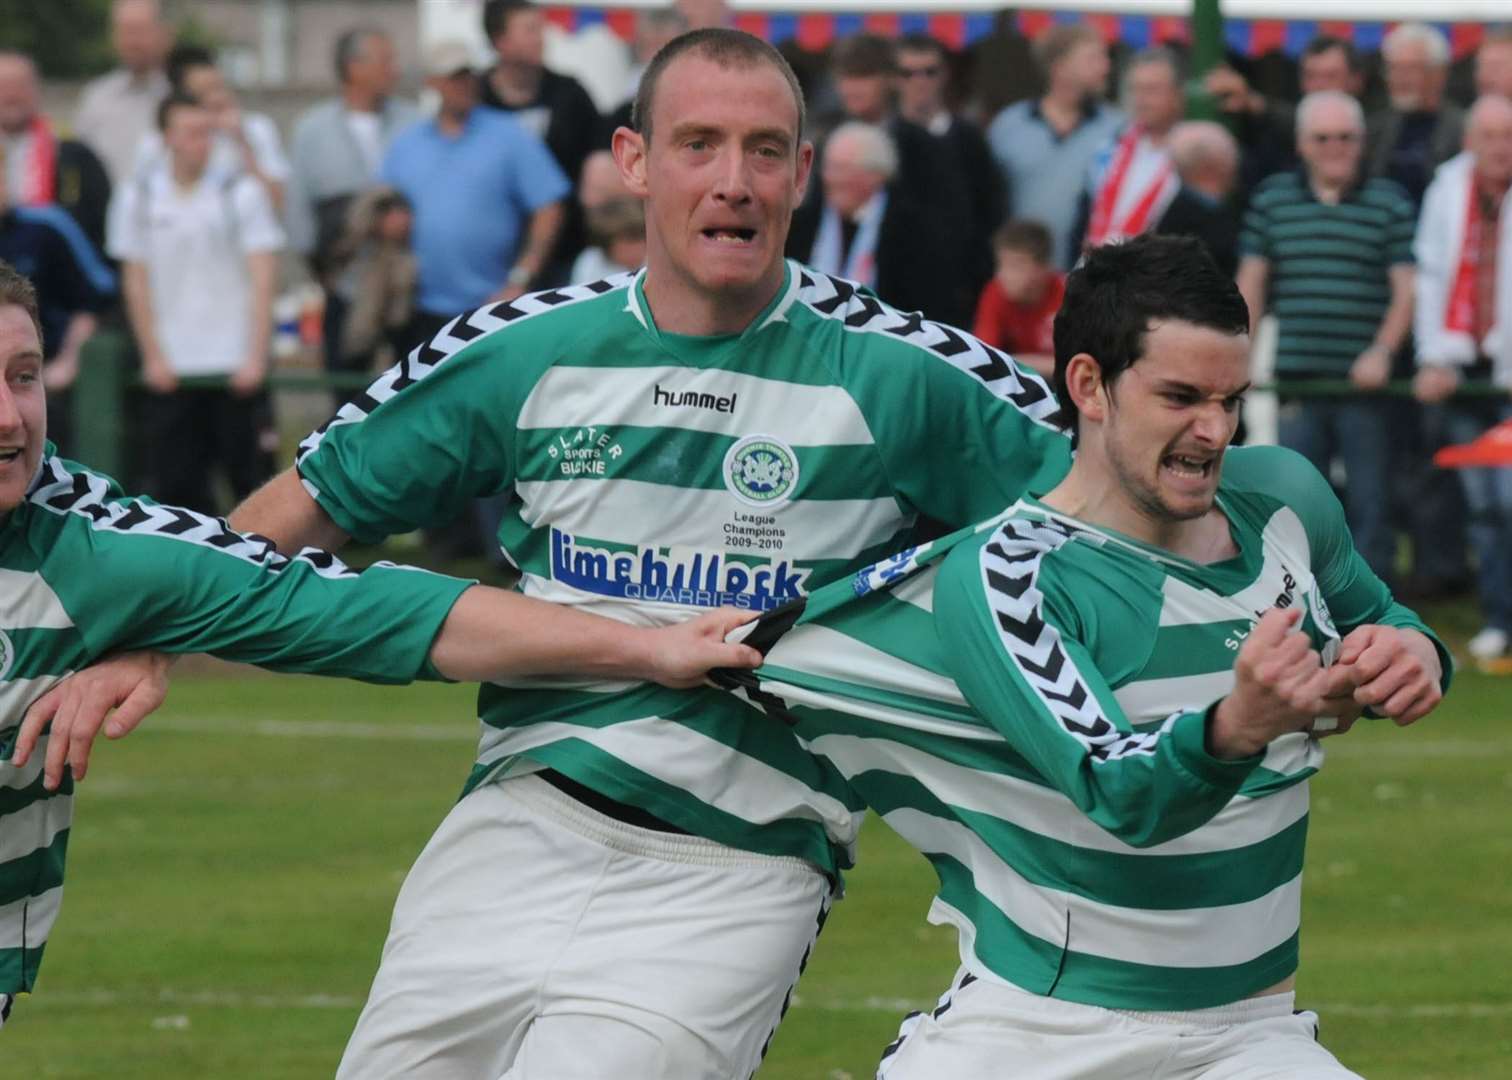 Morrison (centre) gets ready to celebrate on the day he captained Buckie Thistle to the Highland League title.